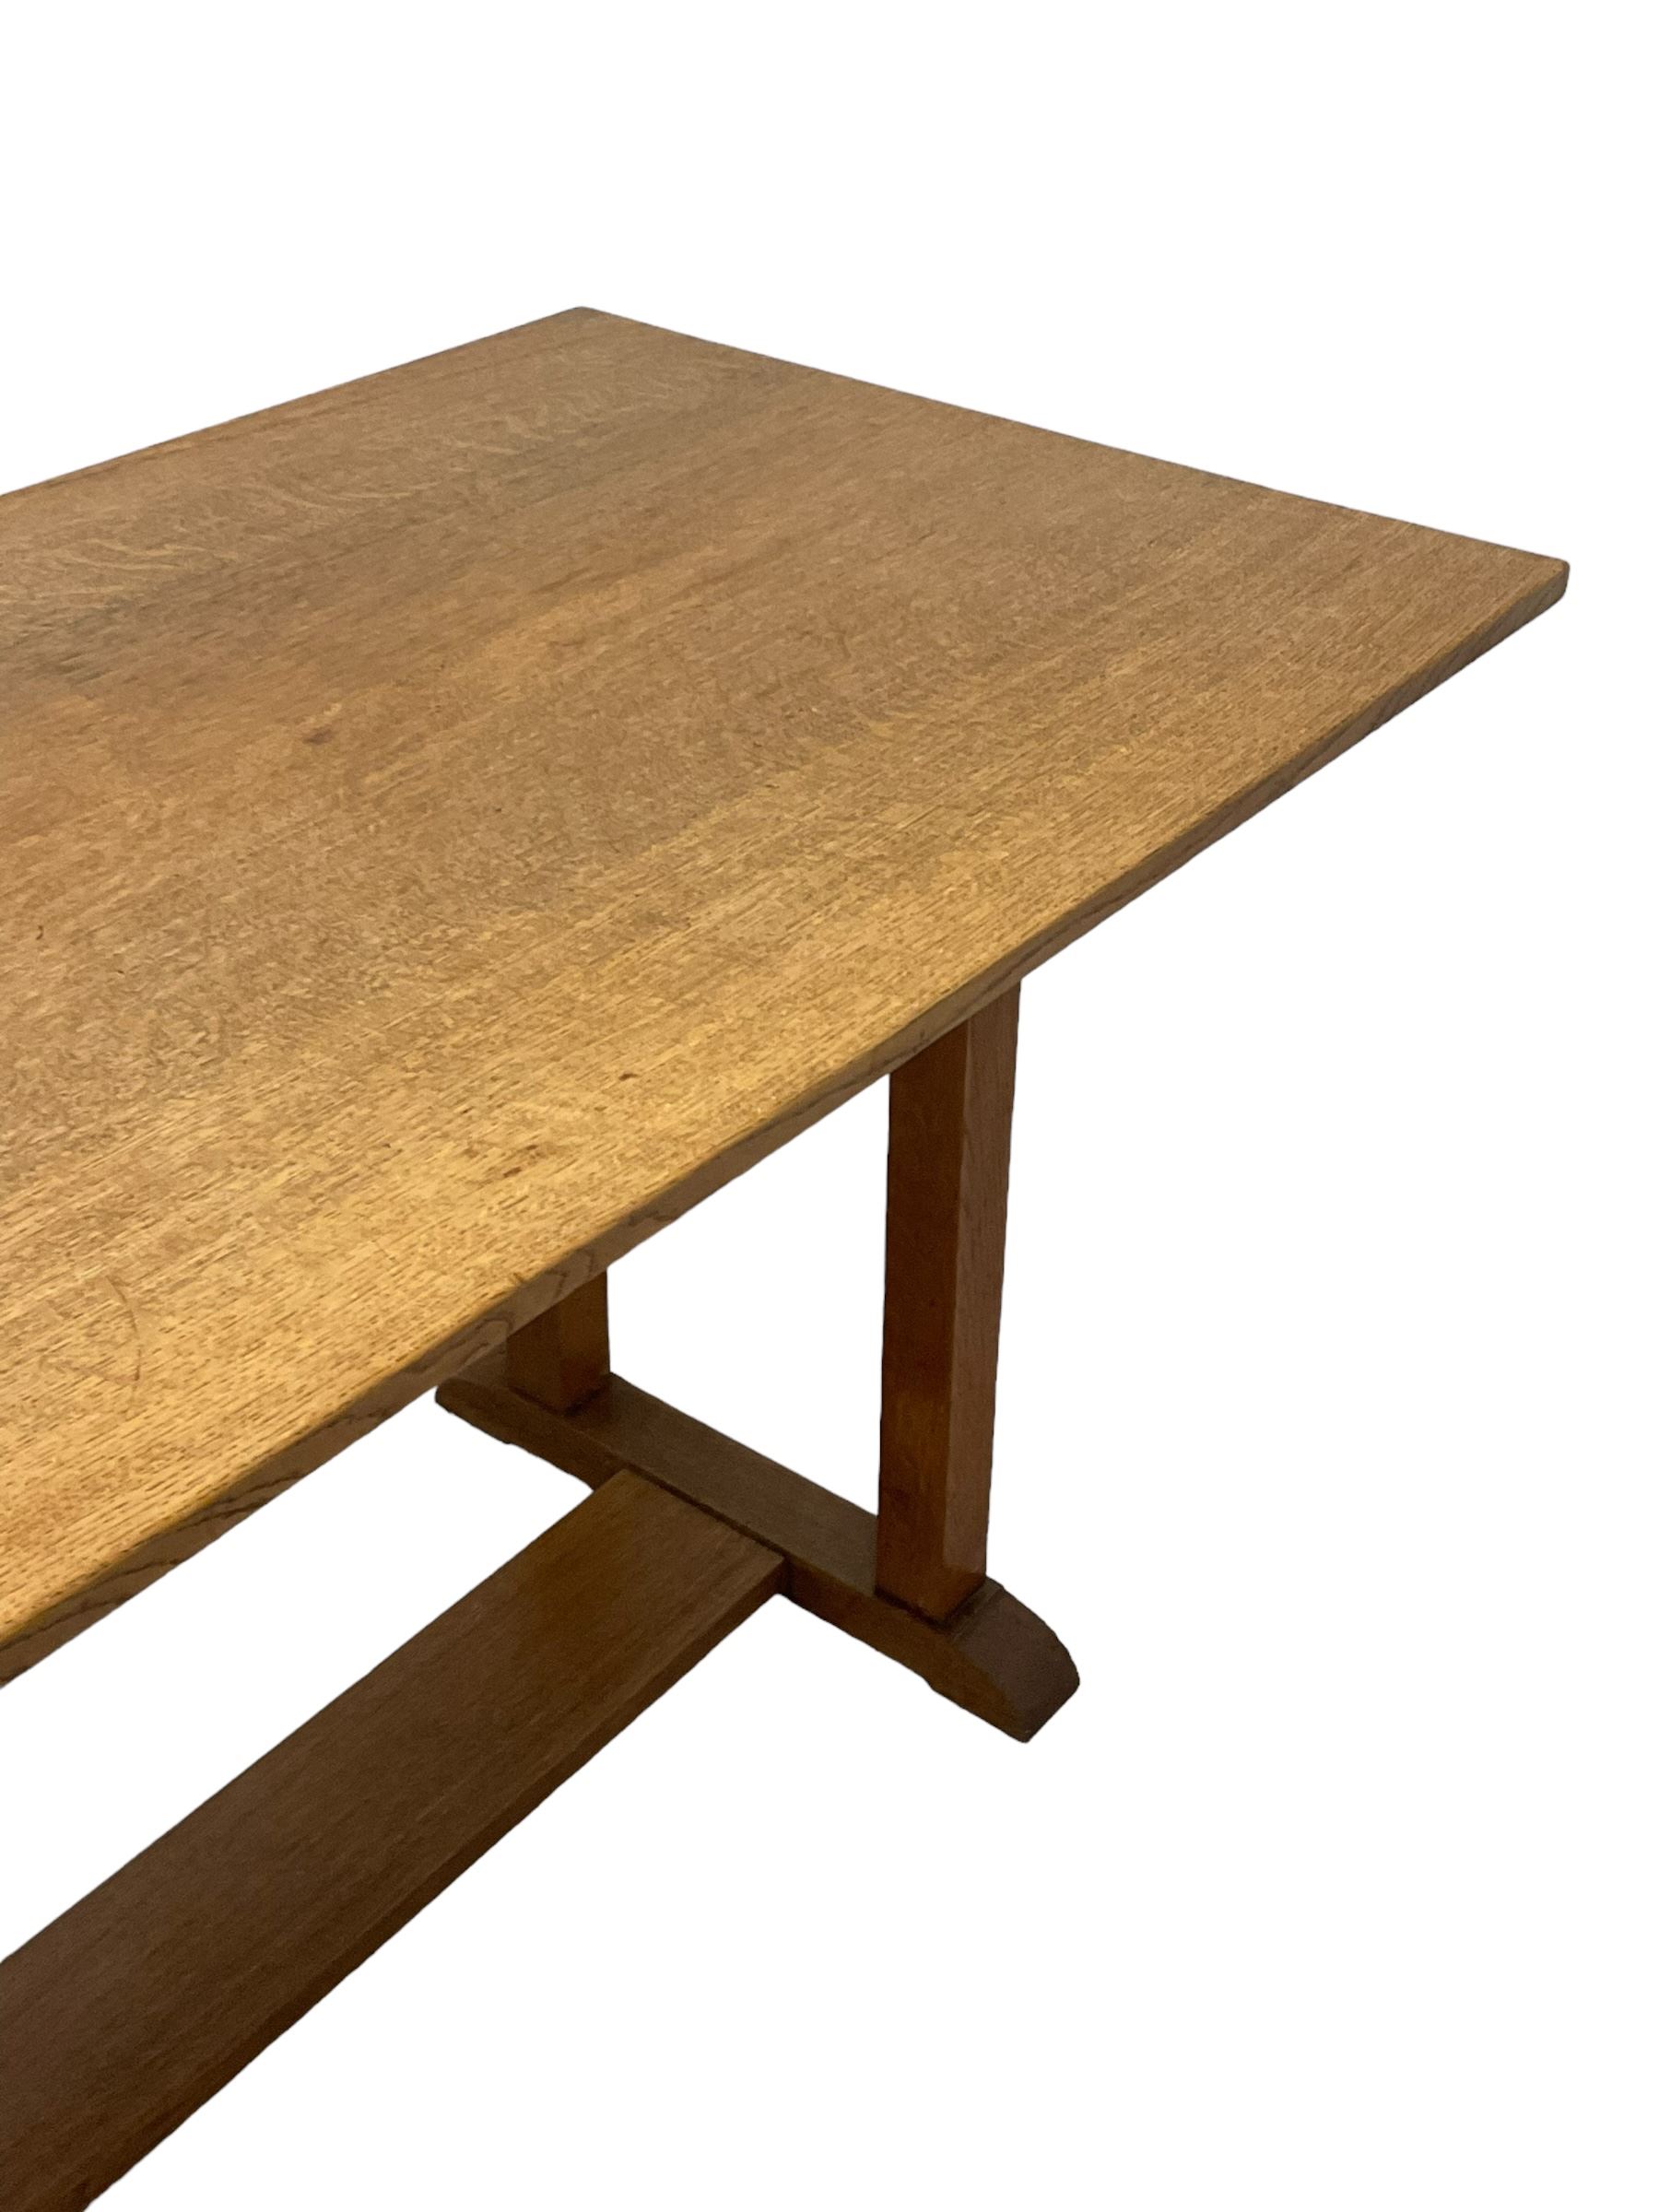 Gordon Russell - circa. 1930s oak refectory dining table - Image 4 of 9